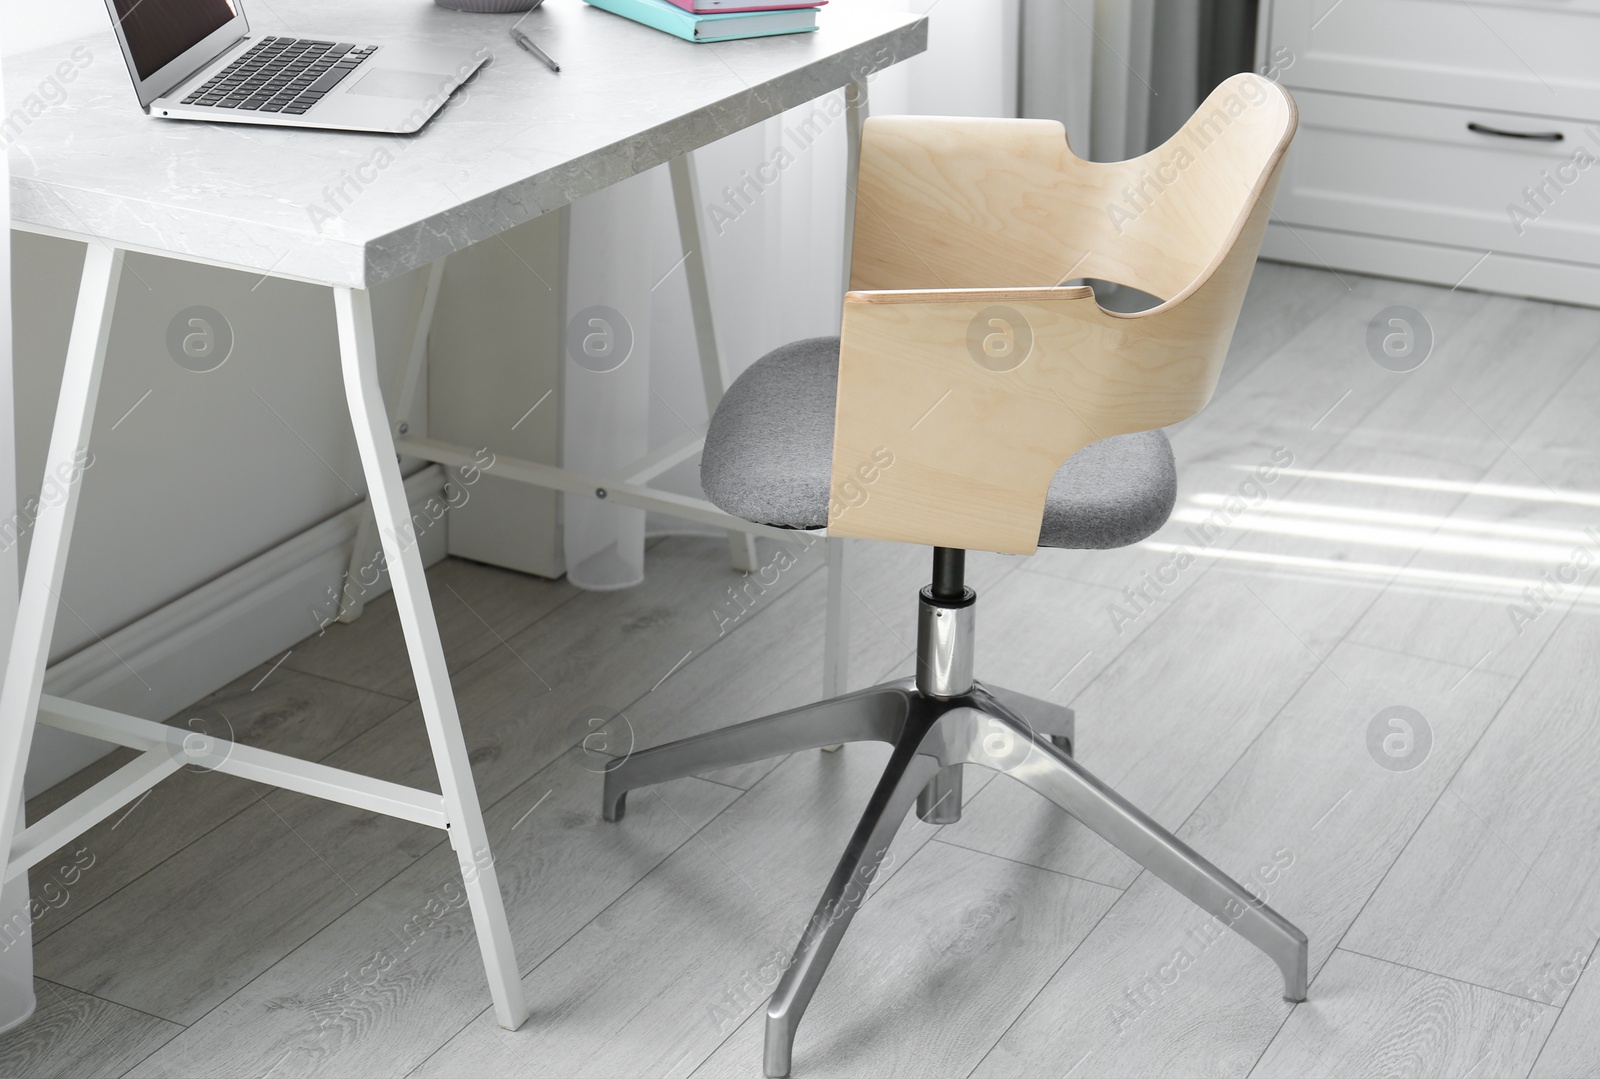 Photo of Comfortable workplace with office chair and modern table